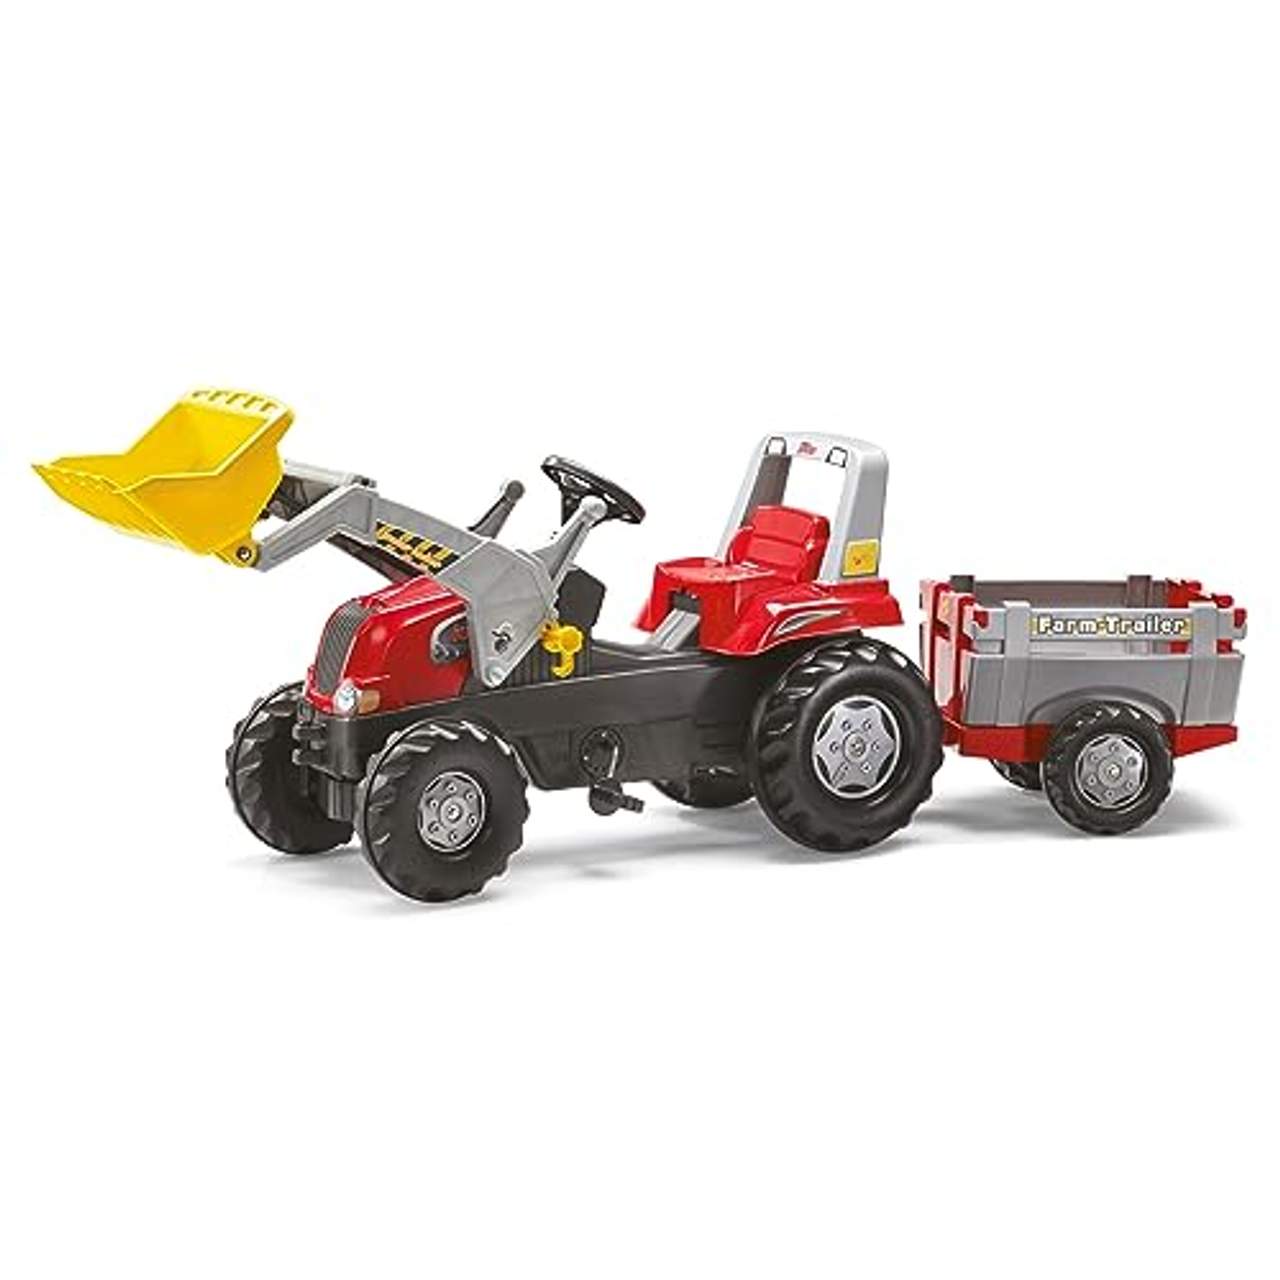 Rolly Toys 811397 rollyJunior RT